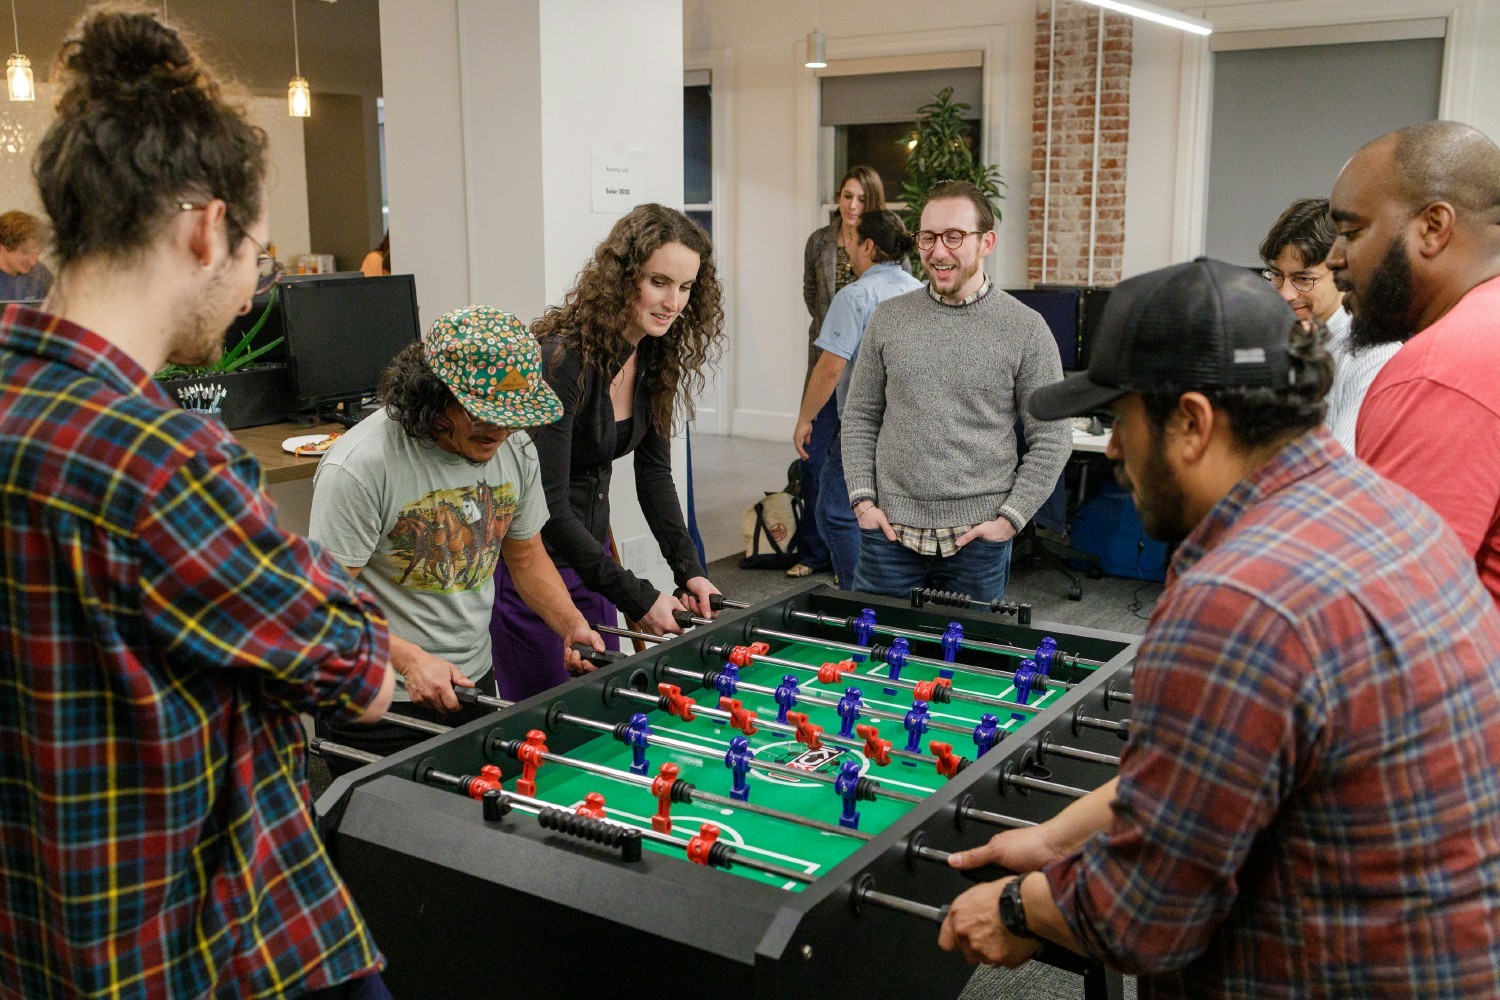 Two of the best foosball players in the office go head-to-head.